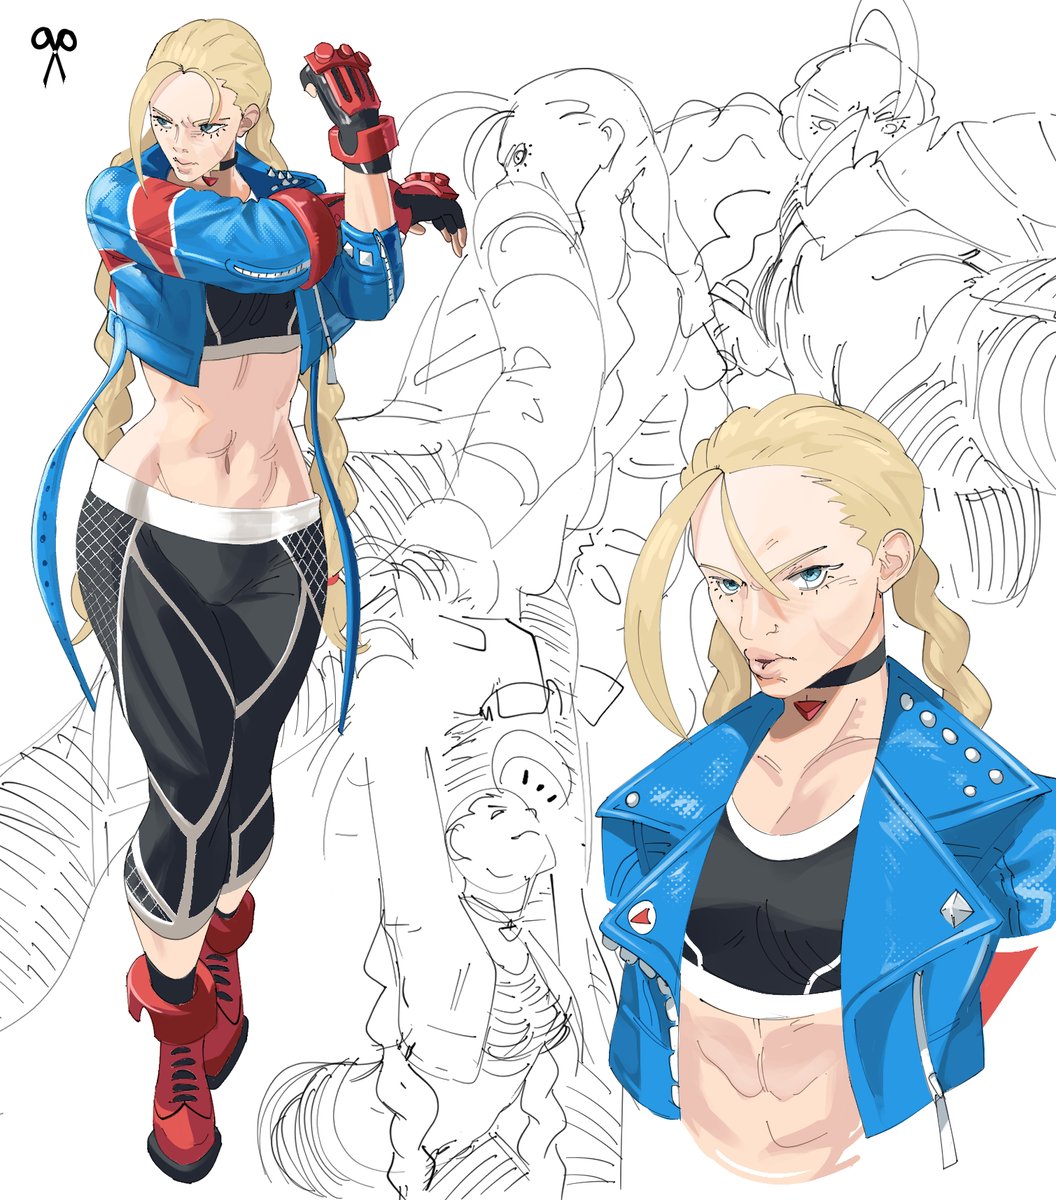 more sf6 Cammy with braids #StreetFighter6